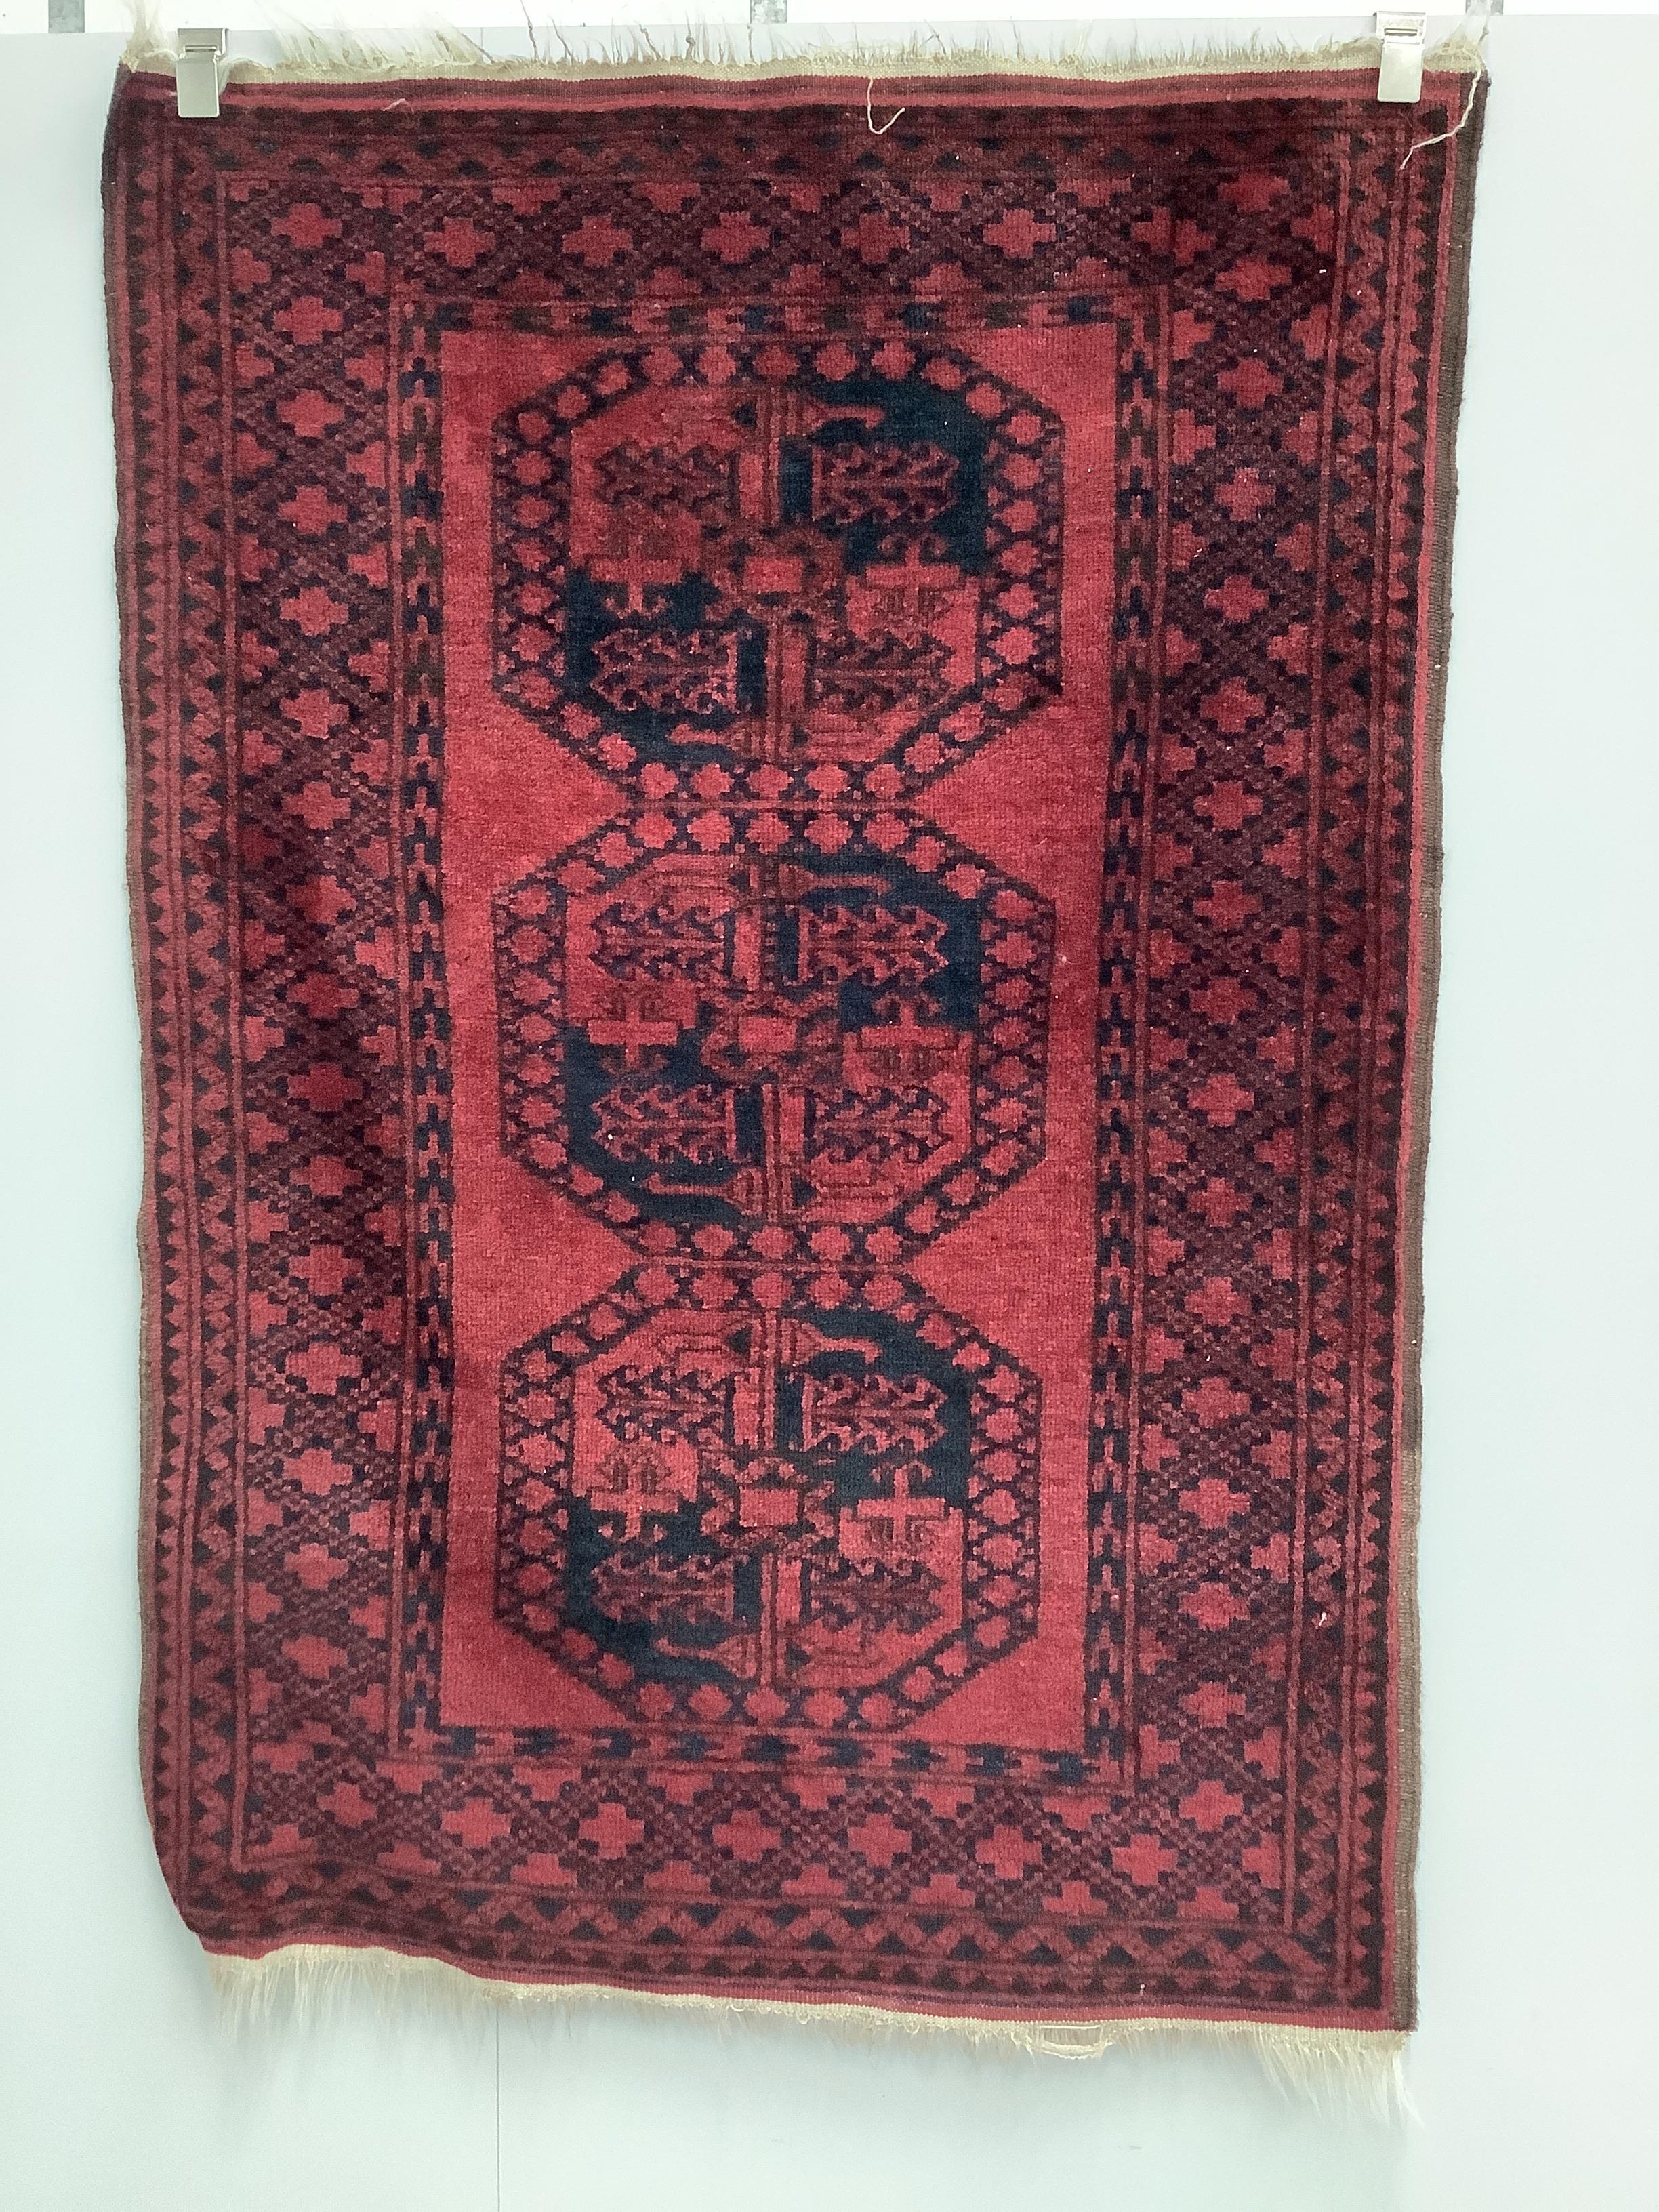 Two Afghan red ground rugs, larger 170 x 120cm                                                                                                                                                                              